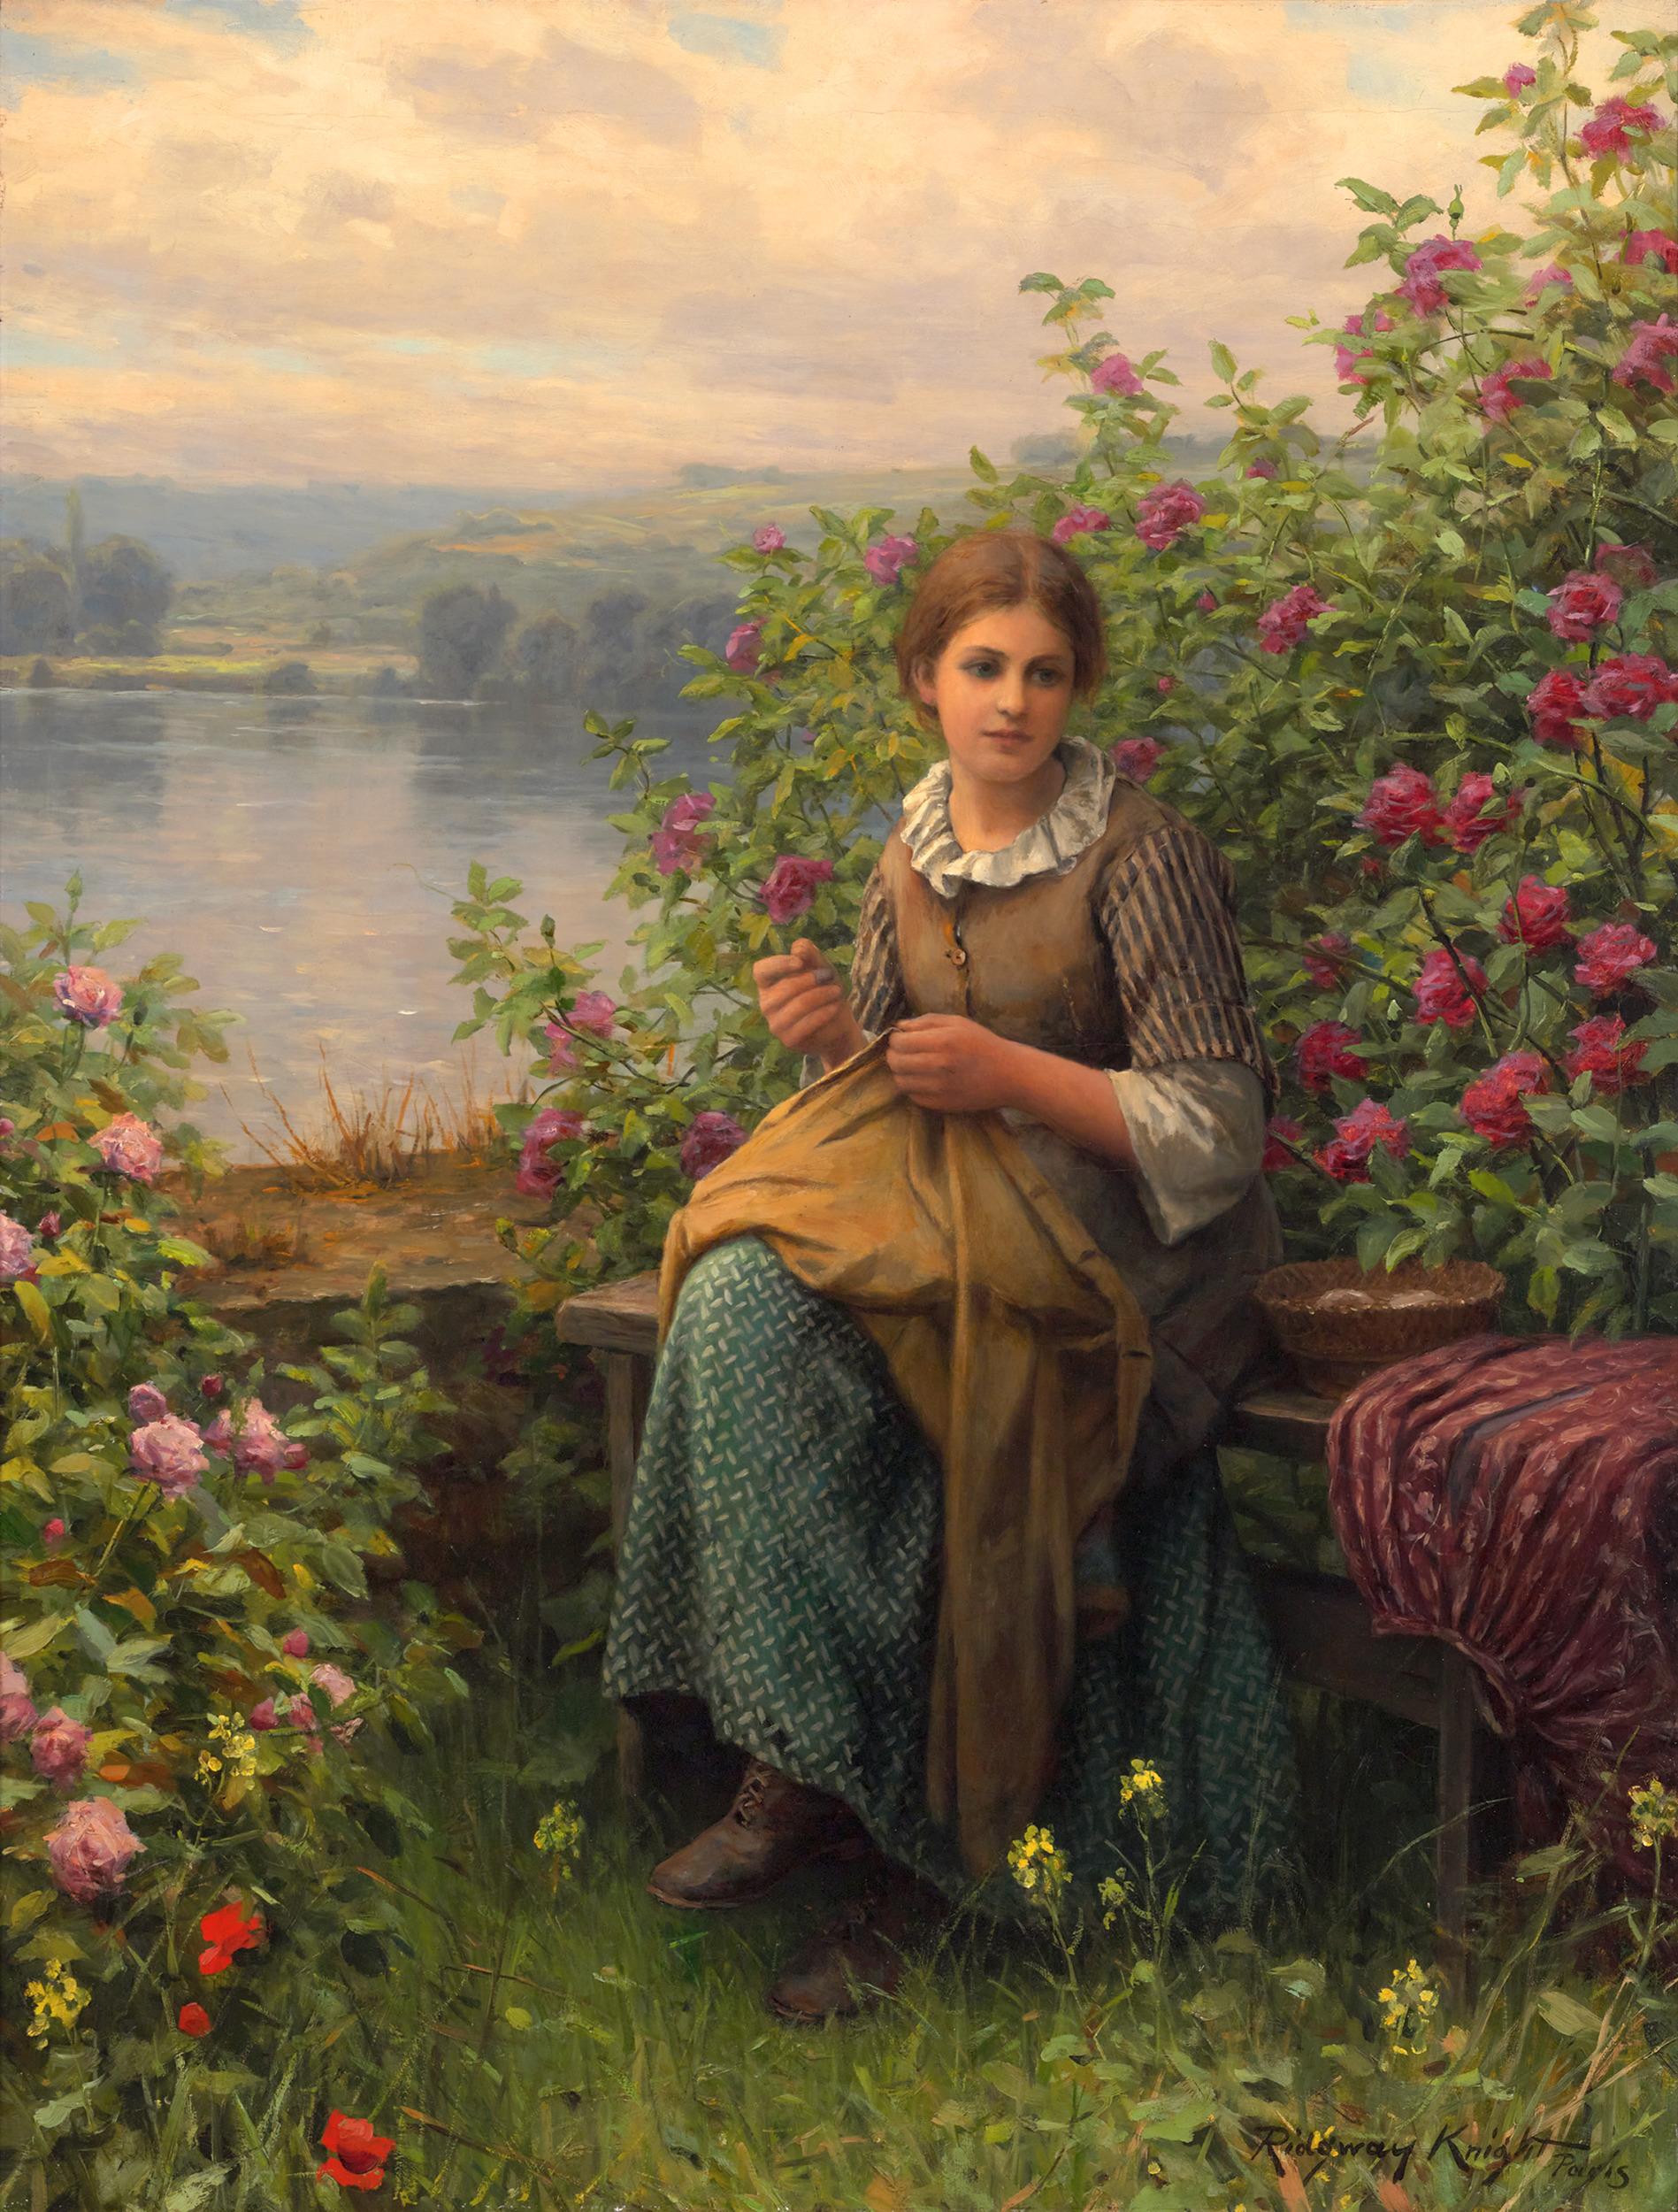 Daniel Ridgway Knight
1839-1924  American 

Mending

Signed lower right
  Oil on canvas 

American painter Daniel Ridgway Knight captures a peasant woman in a tranquil moment of reflection as she sits mending in a meadow in this remarkable